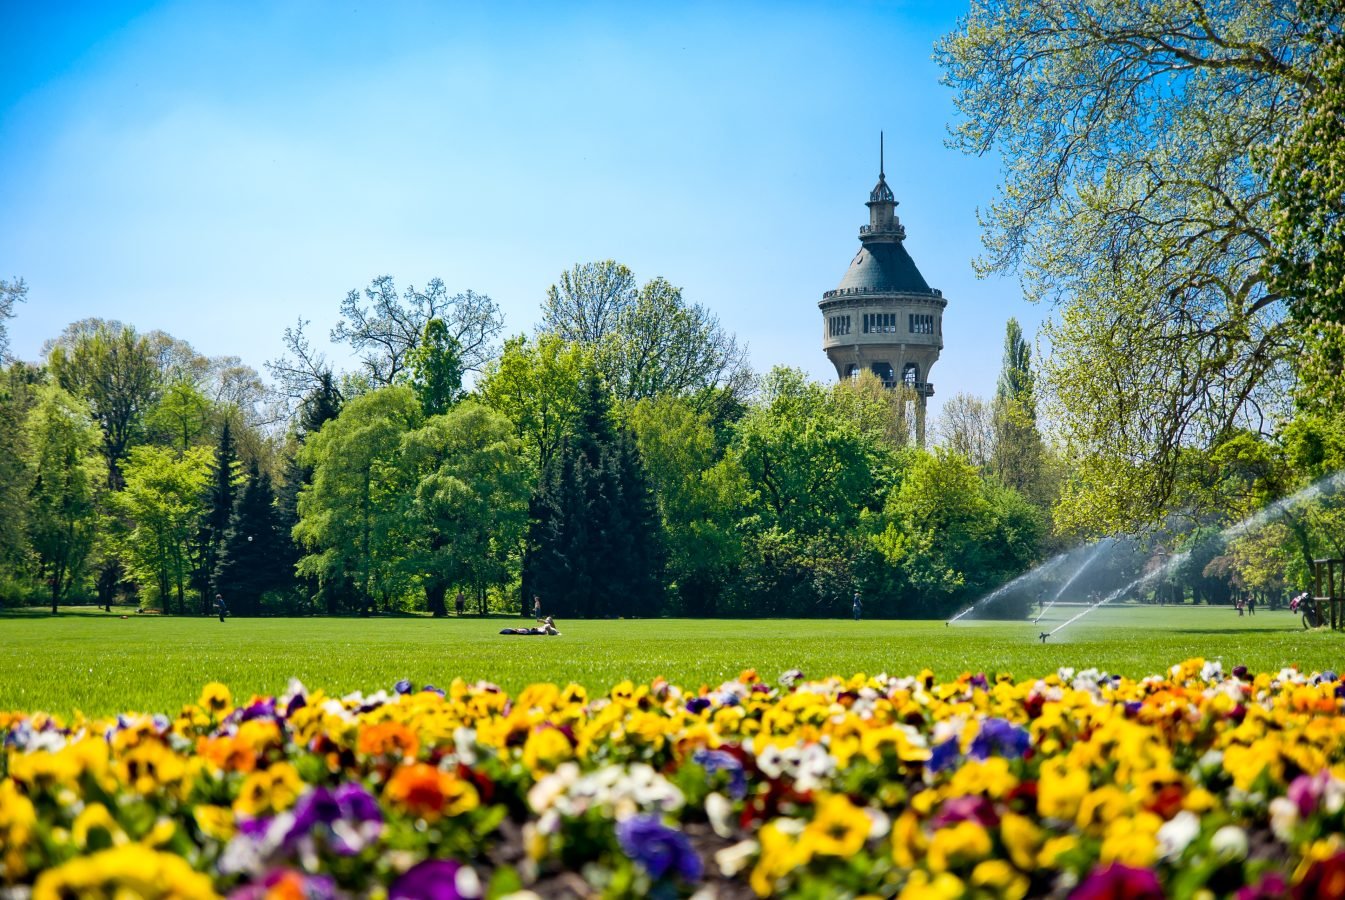 view of blooming flowers and a green lawn on margaret island, one of the best places to visit budapest hungary